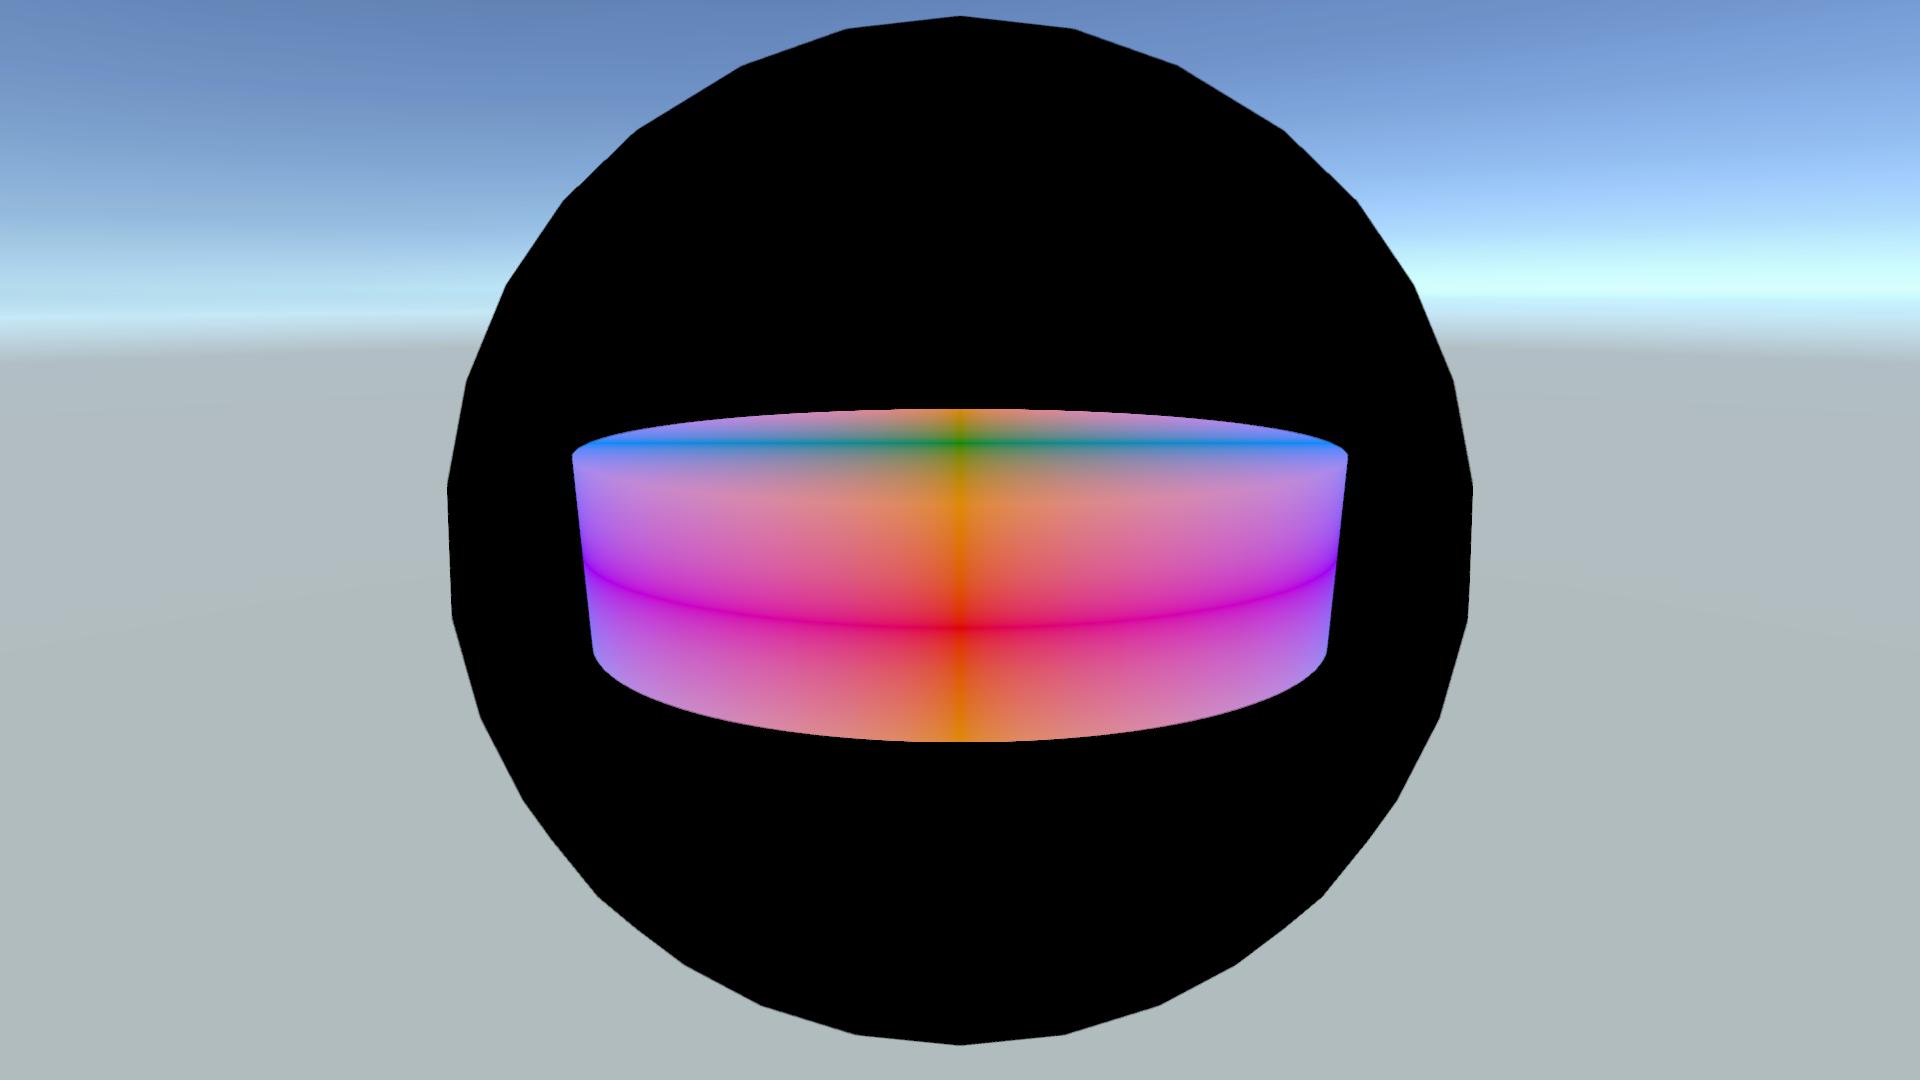 Capped cylinder on a 50 scale sphere object with parameters \(s_x = 15\), \(s_y = 10\), \(s_z = 20\) and distance scale = 20